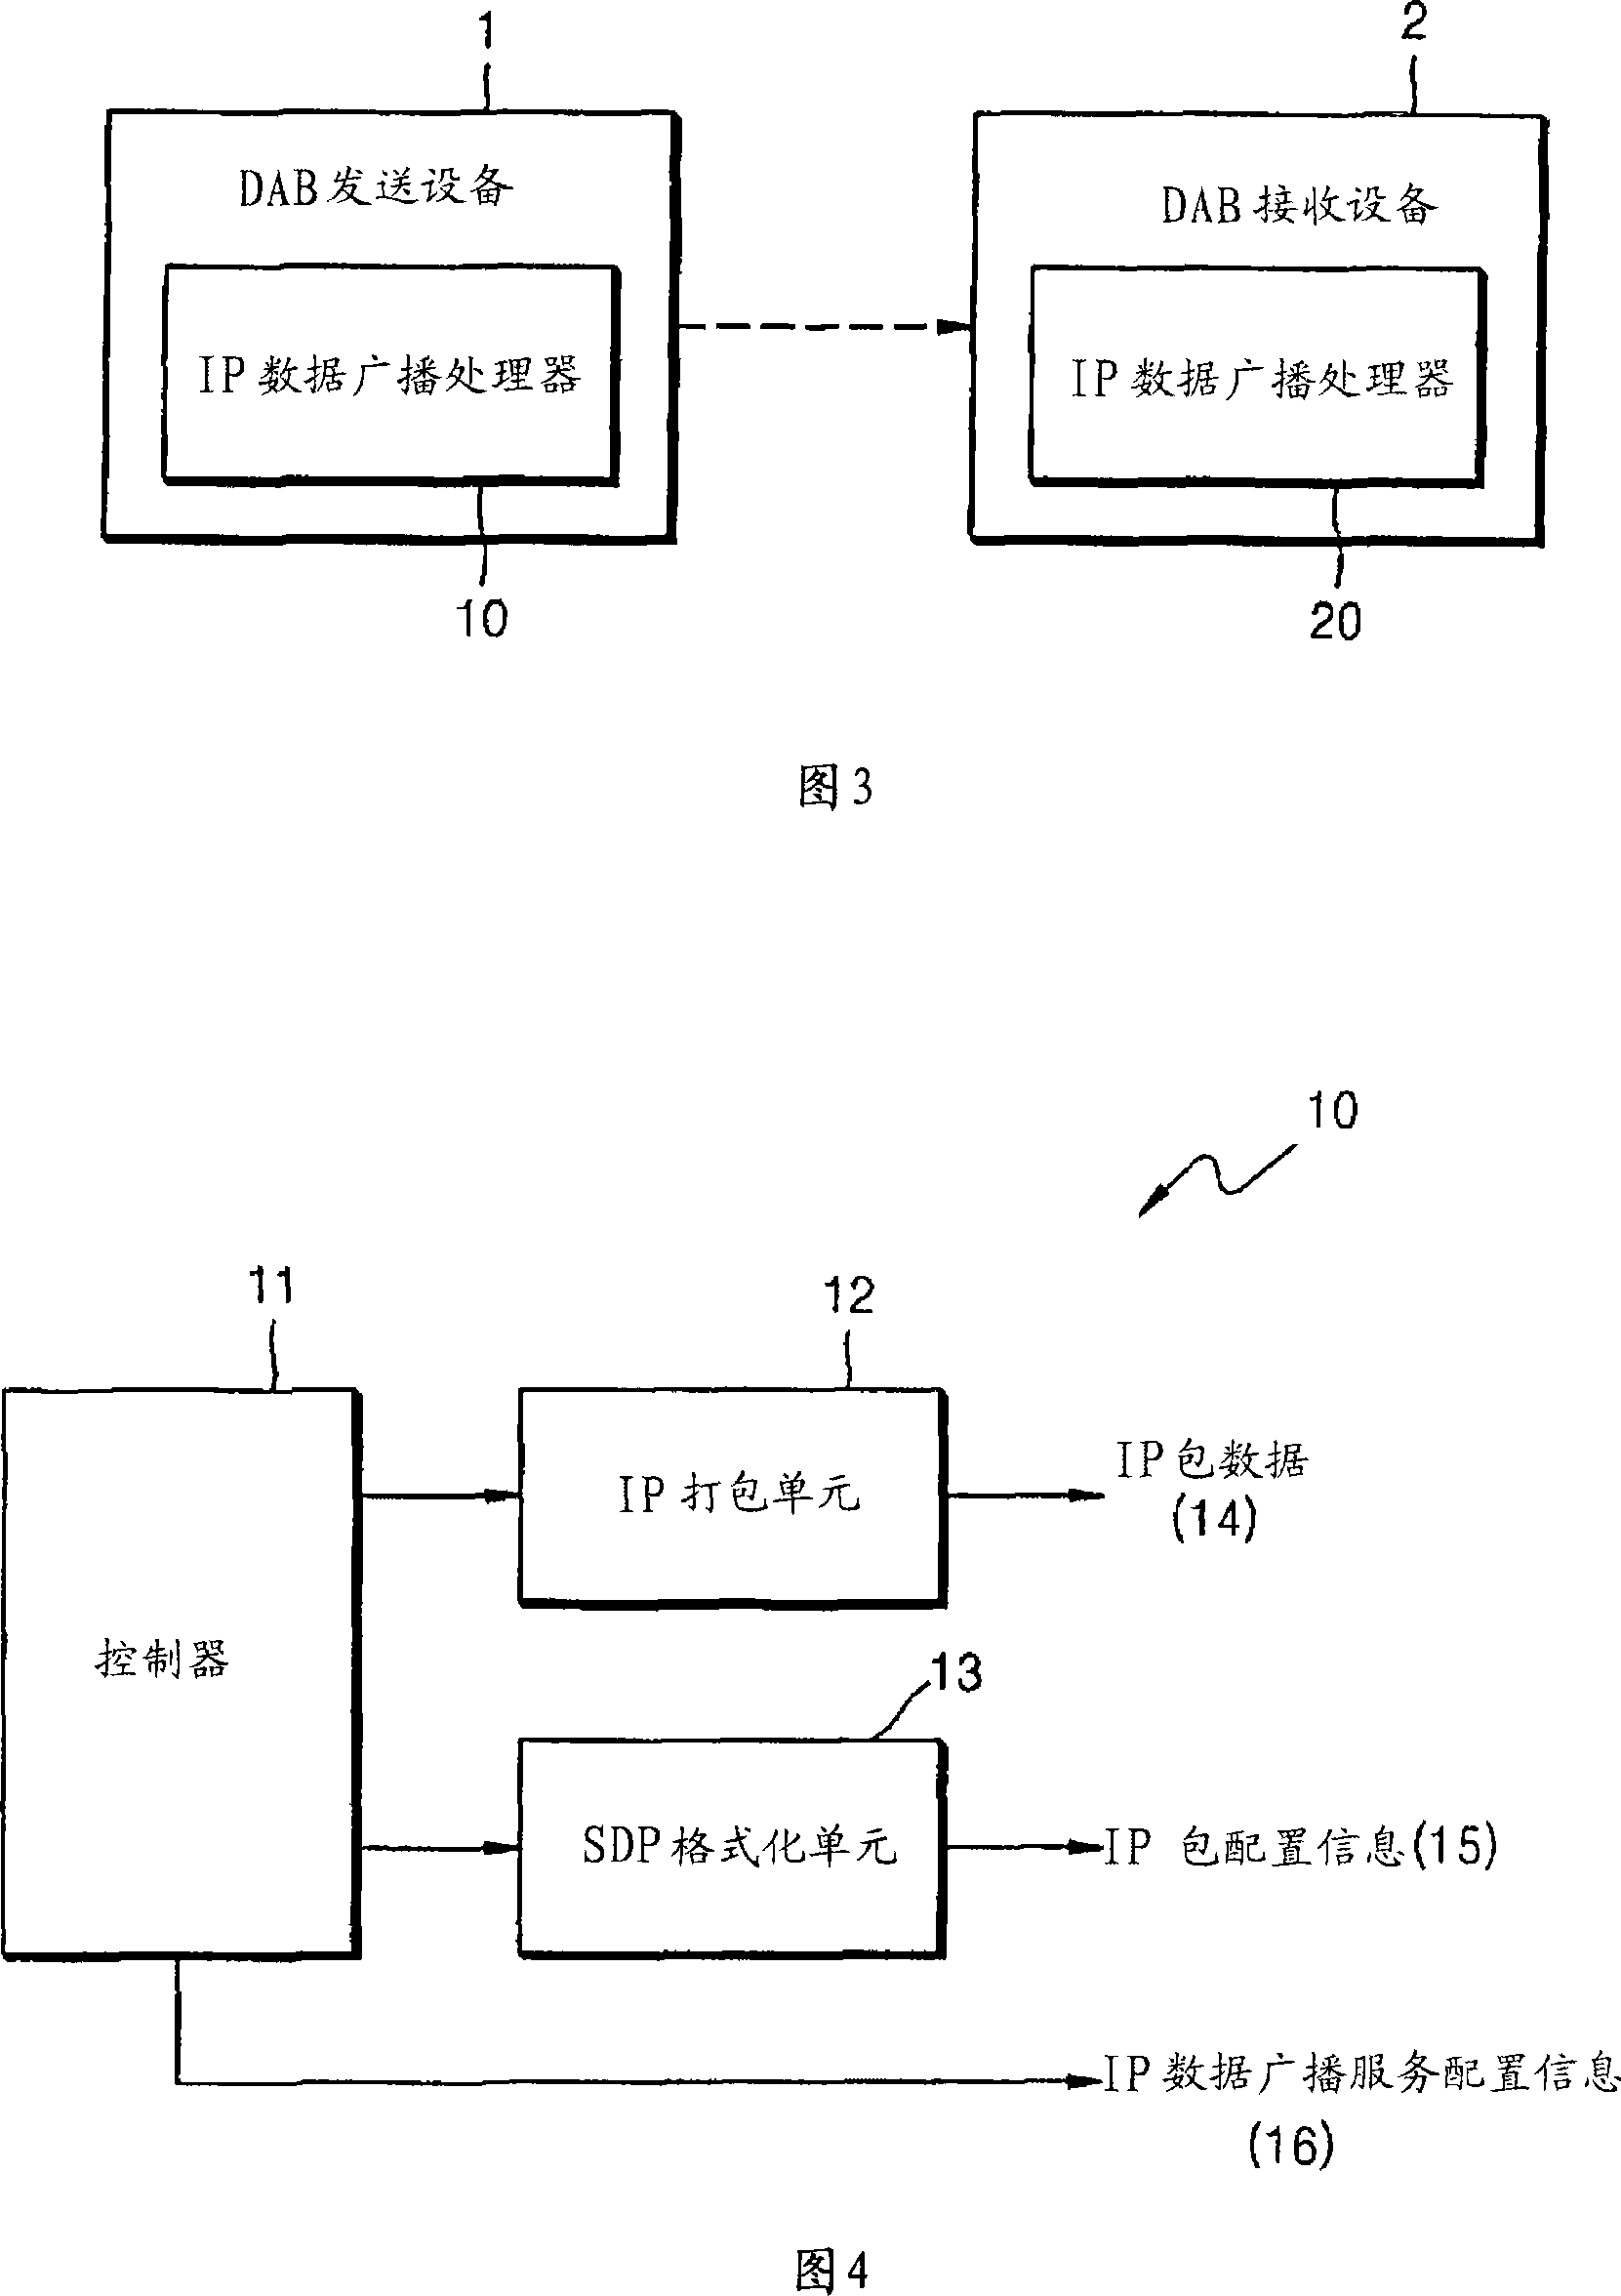 Method and apparatus for providing IP datacasting service in digital audio broadcasting system